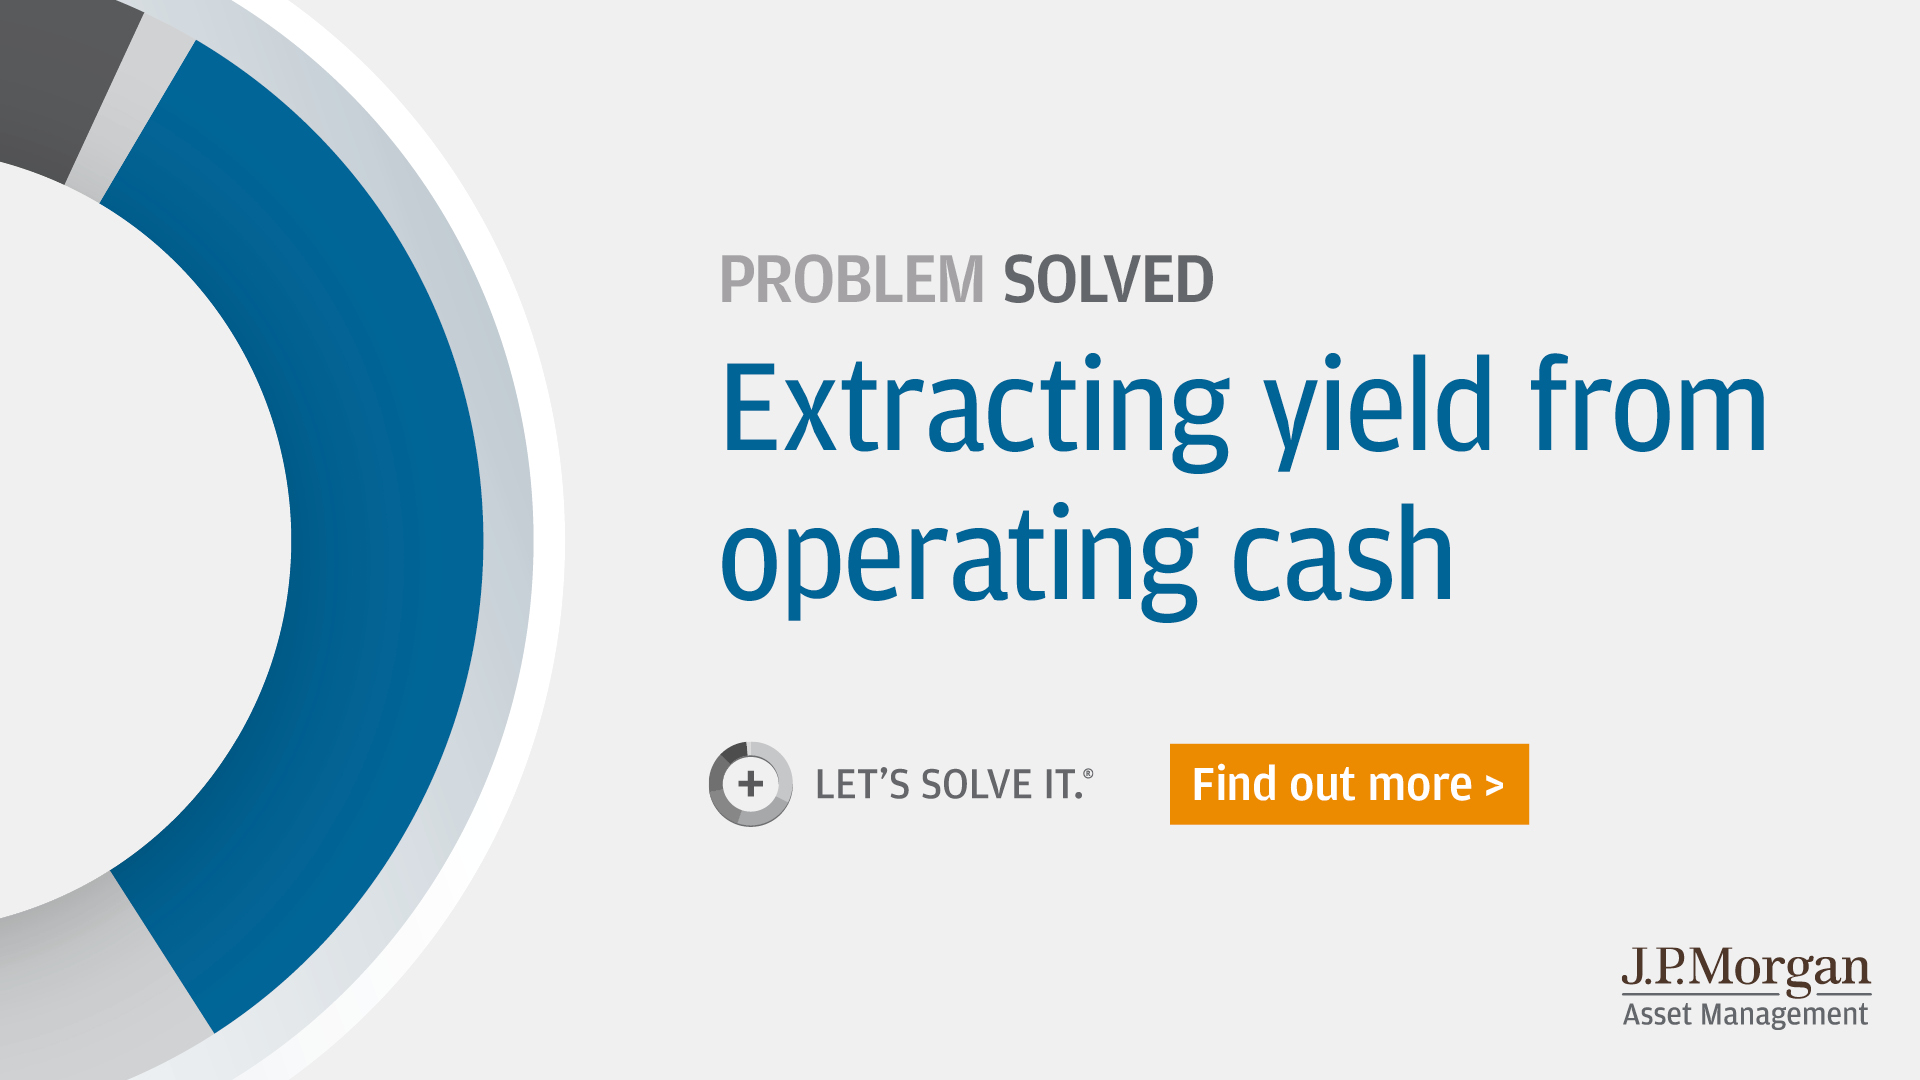 Problem Solved: Extracting yield from operating cash